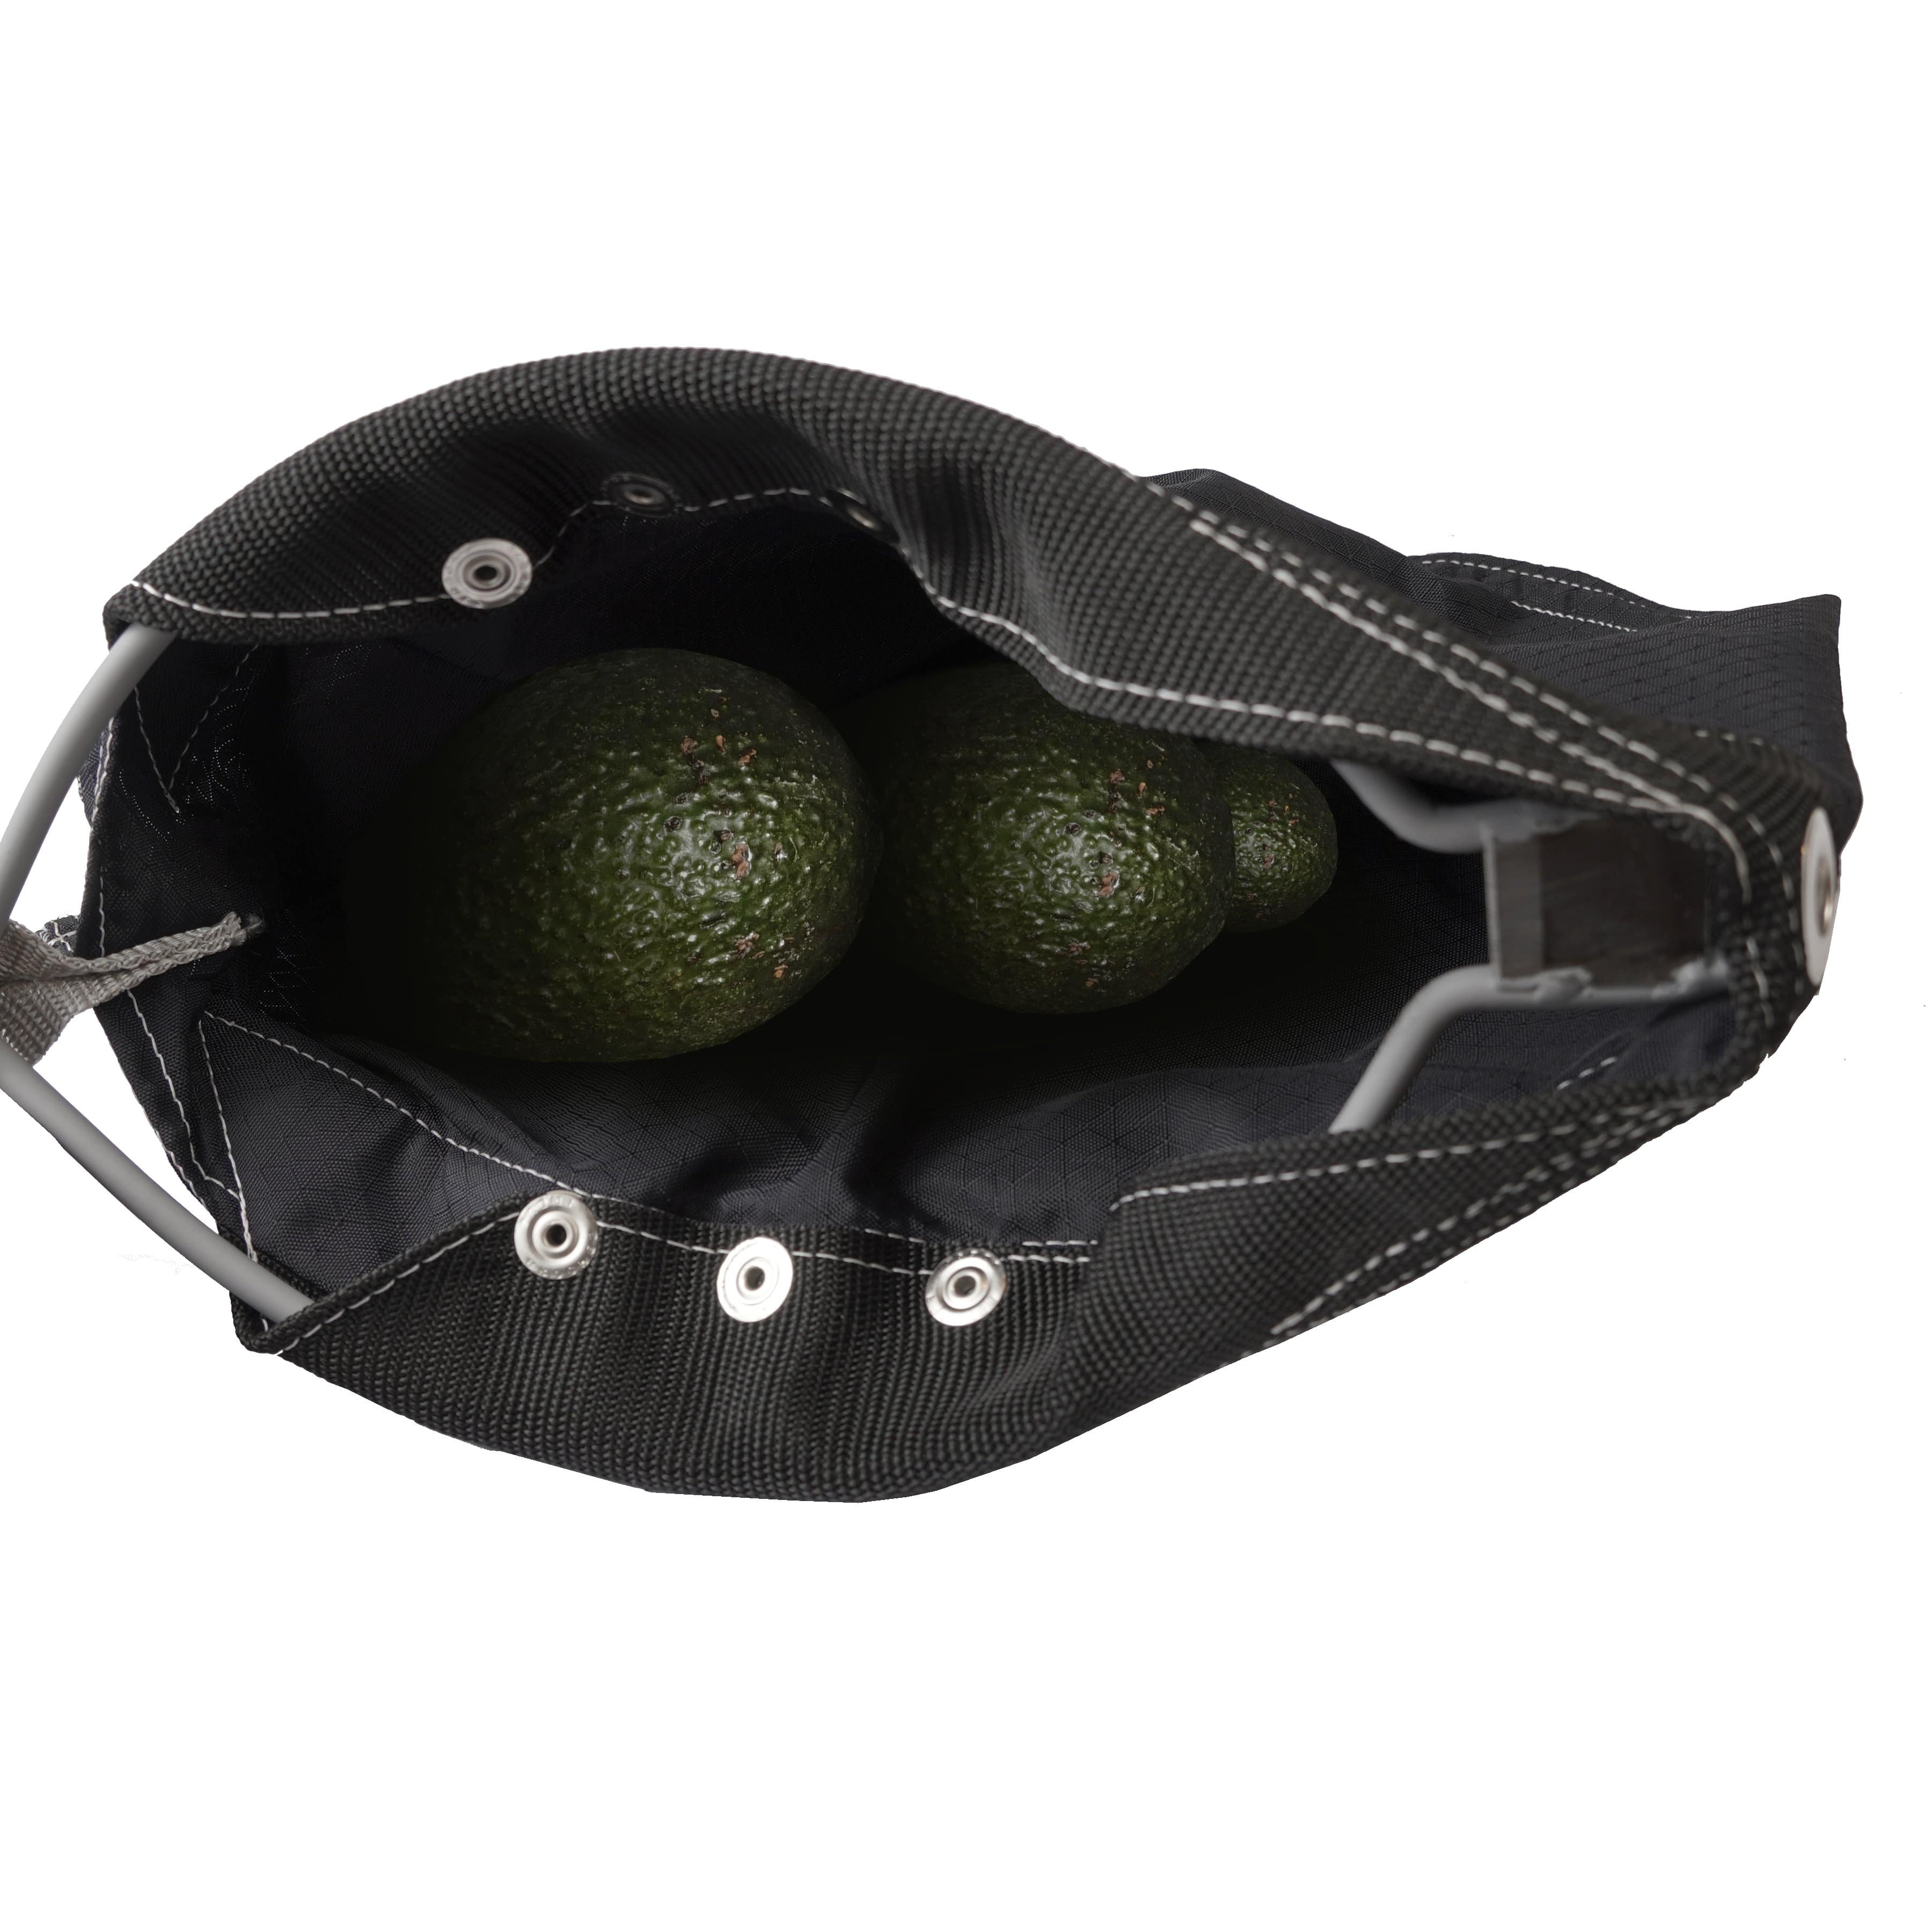 Pull and Cut Avocado Picker - Fruit Picker Head with Bag